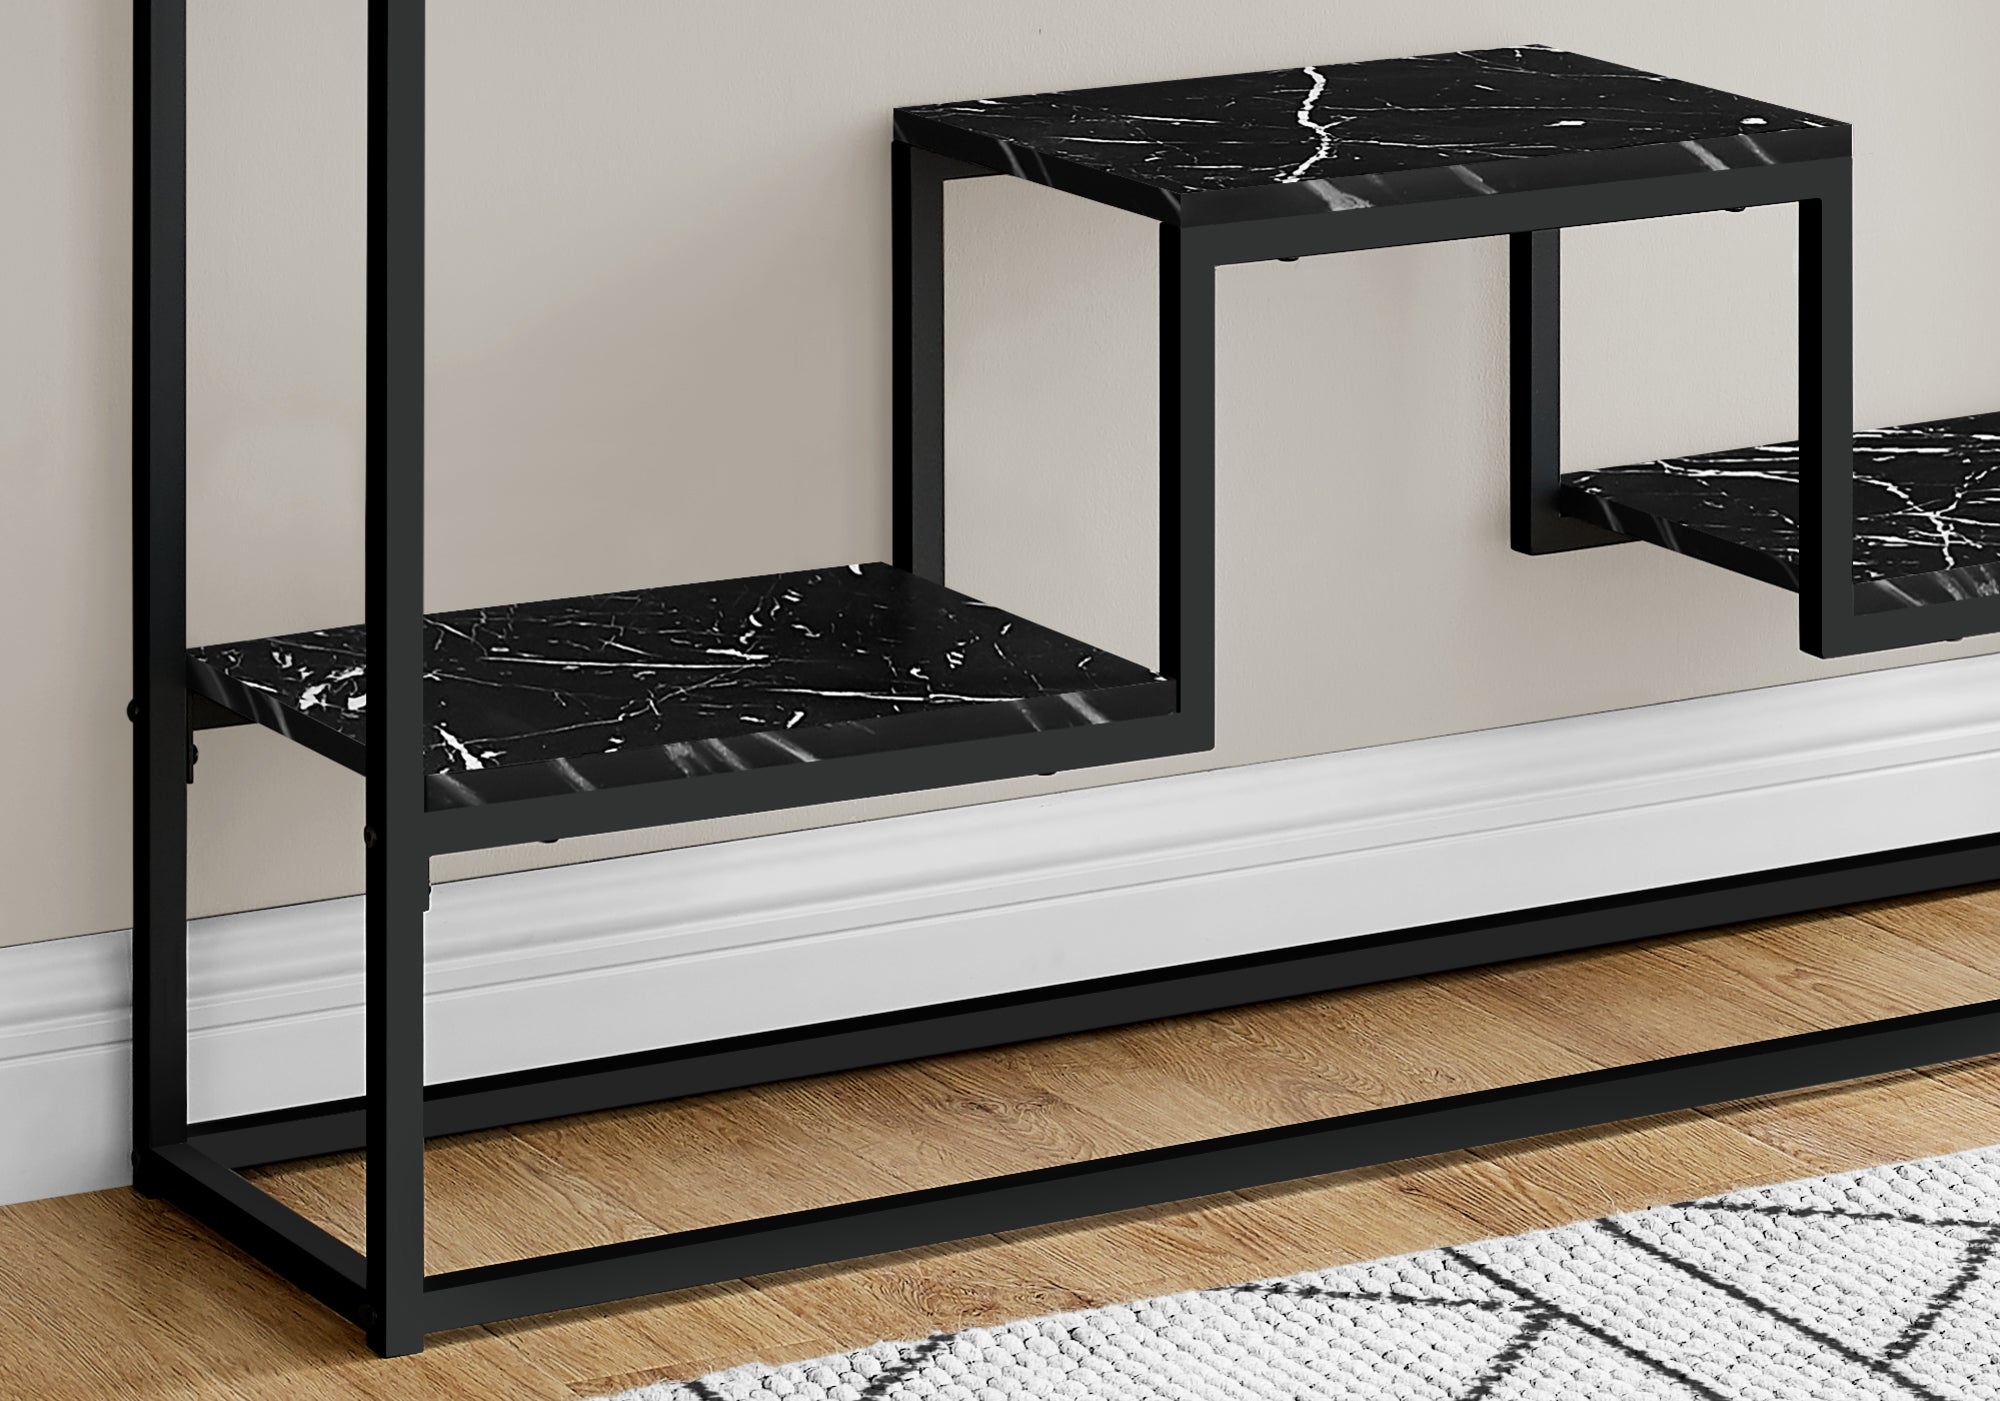 MN-423579    Accent Table, Console, Entryway, Narrow, Sofa, Living Room, Bedroom, Metal Frame, Laminate, Black Marble-Look, Contemporary, Glam, Modern